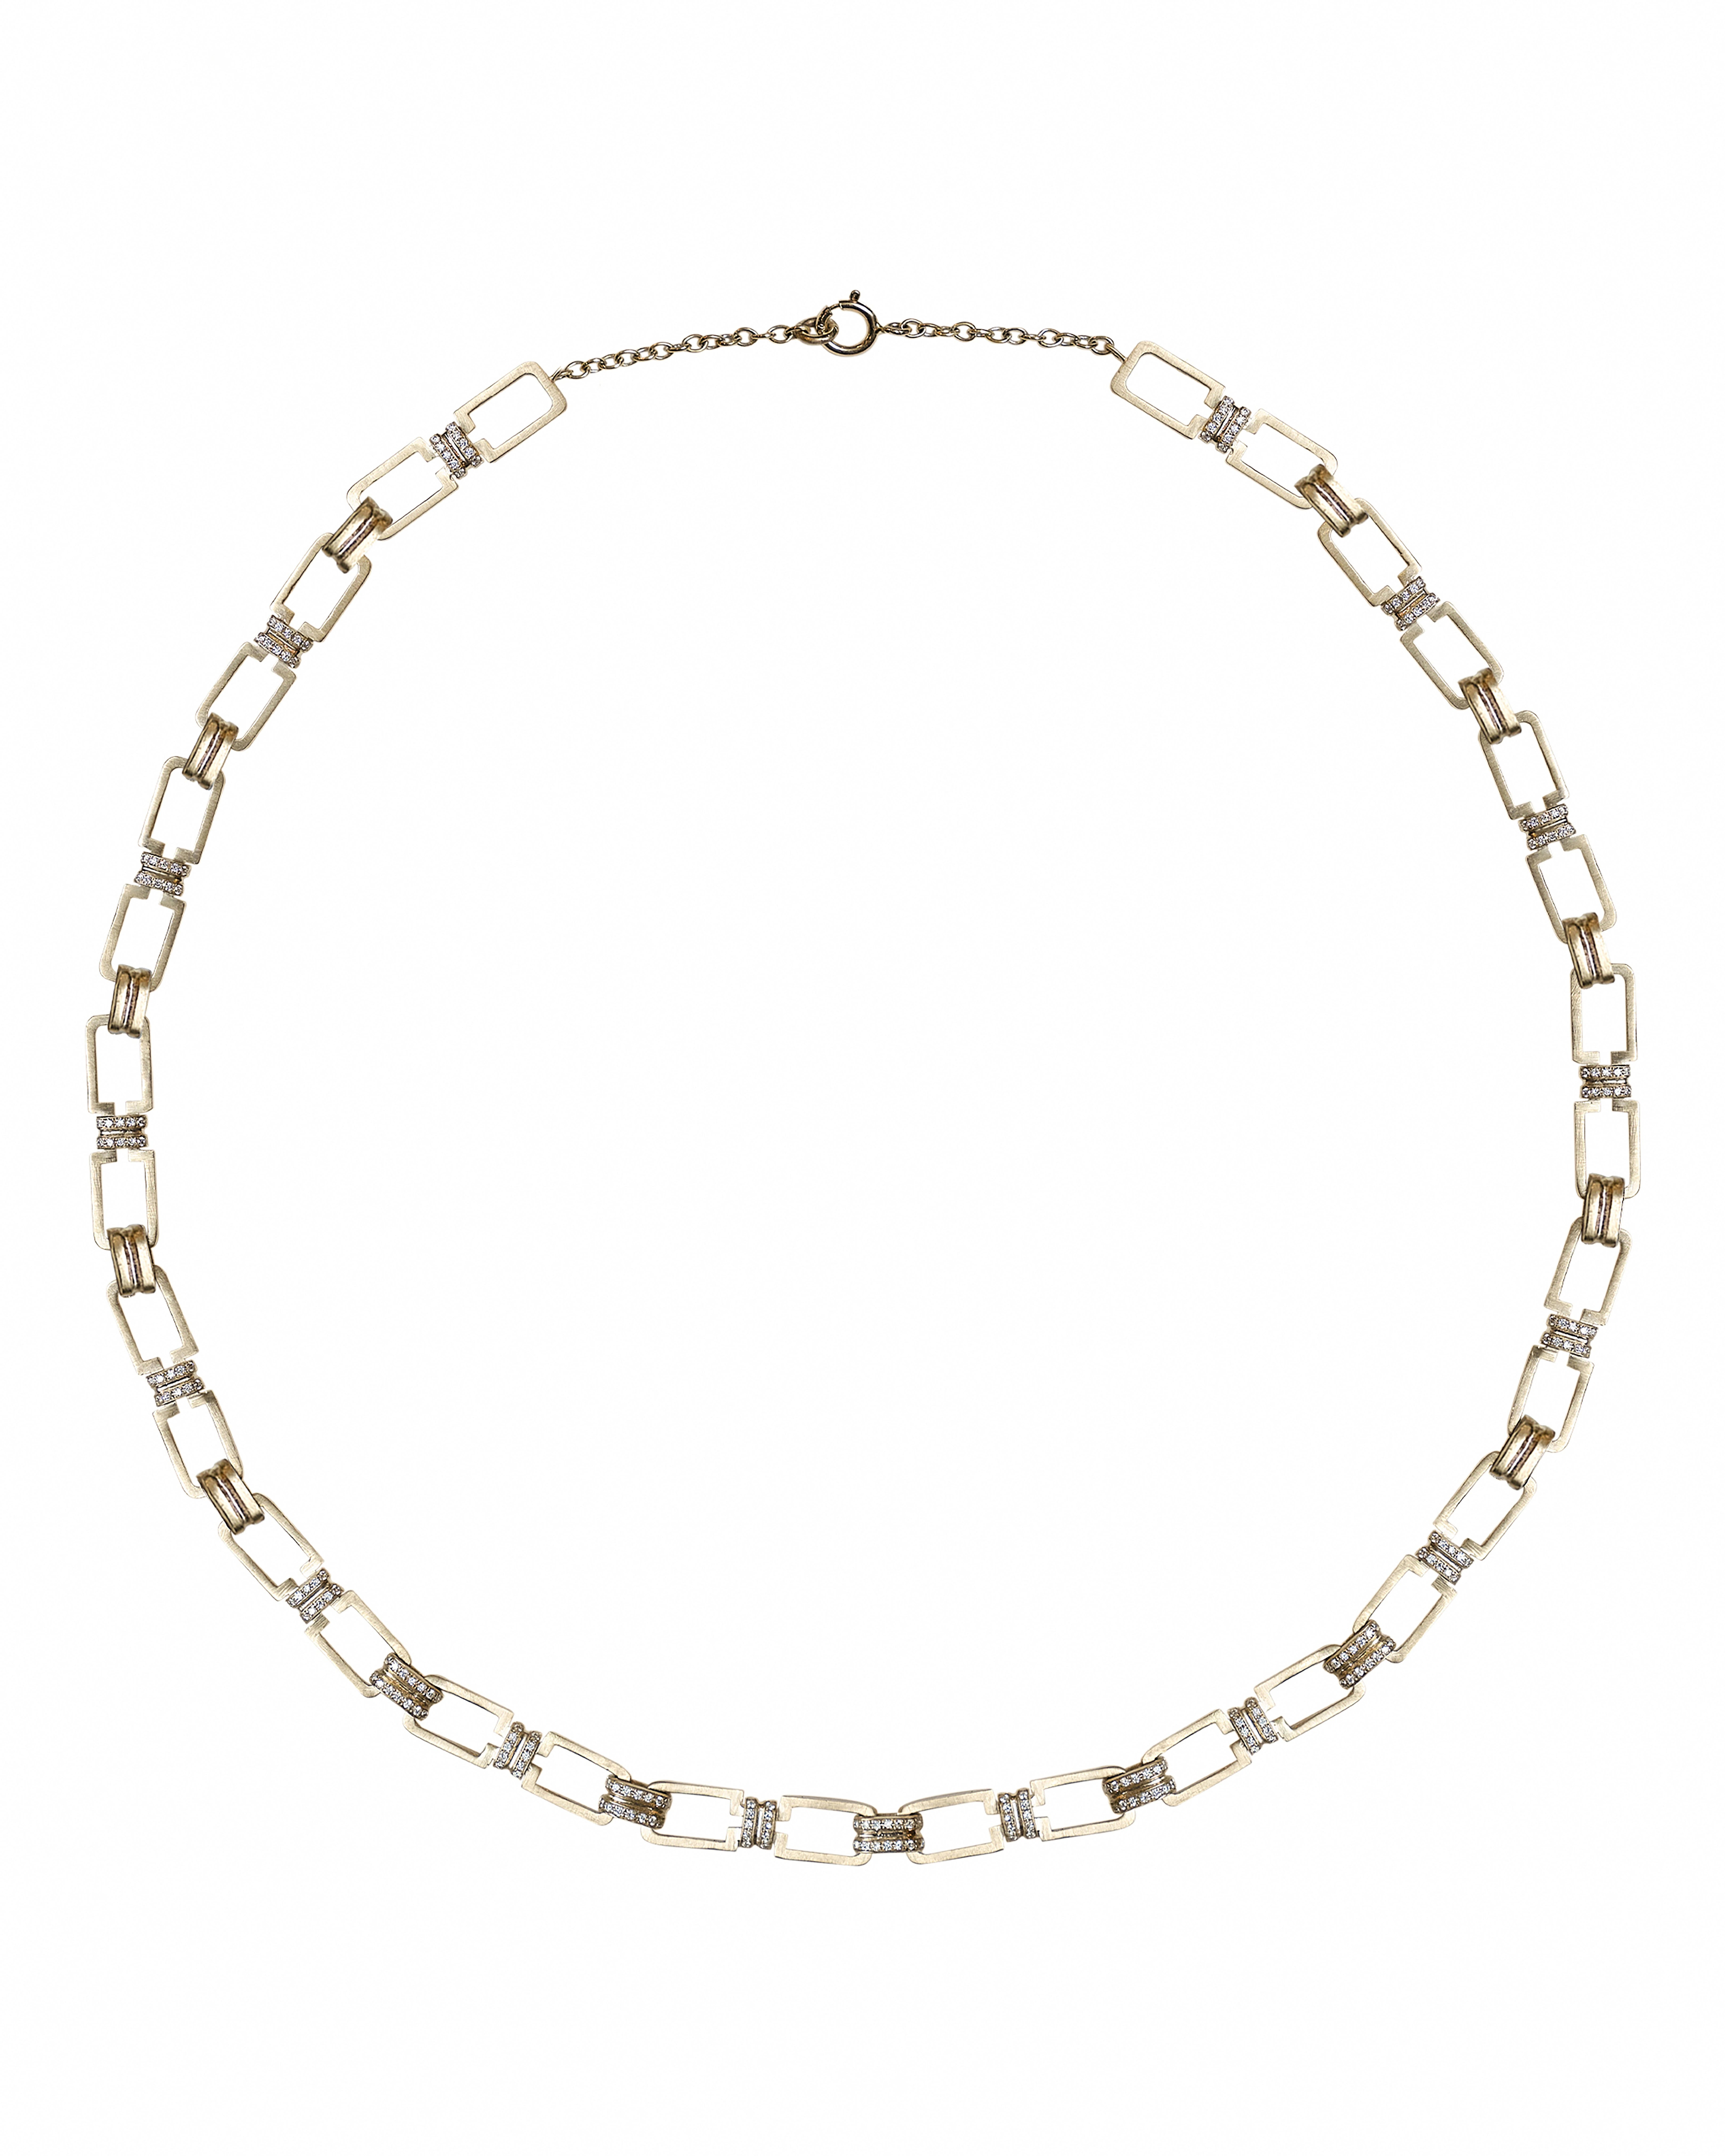 This necklace from POLINA ELLIS' ENOSIS collection is handcrafted in 18K raw white gold with 0,52ct white brilliant cut diamonds.
Total Length: 40cm